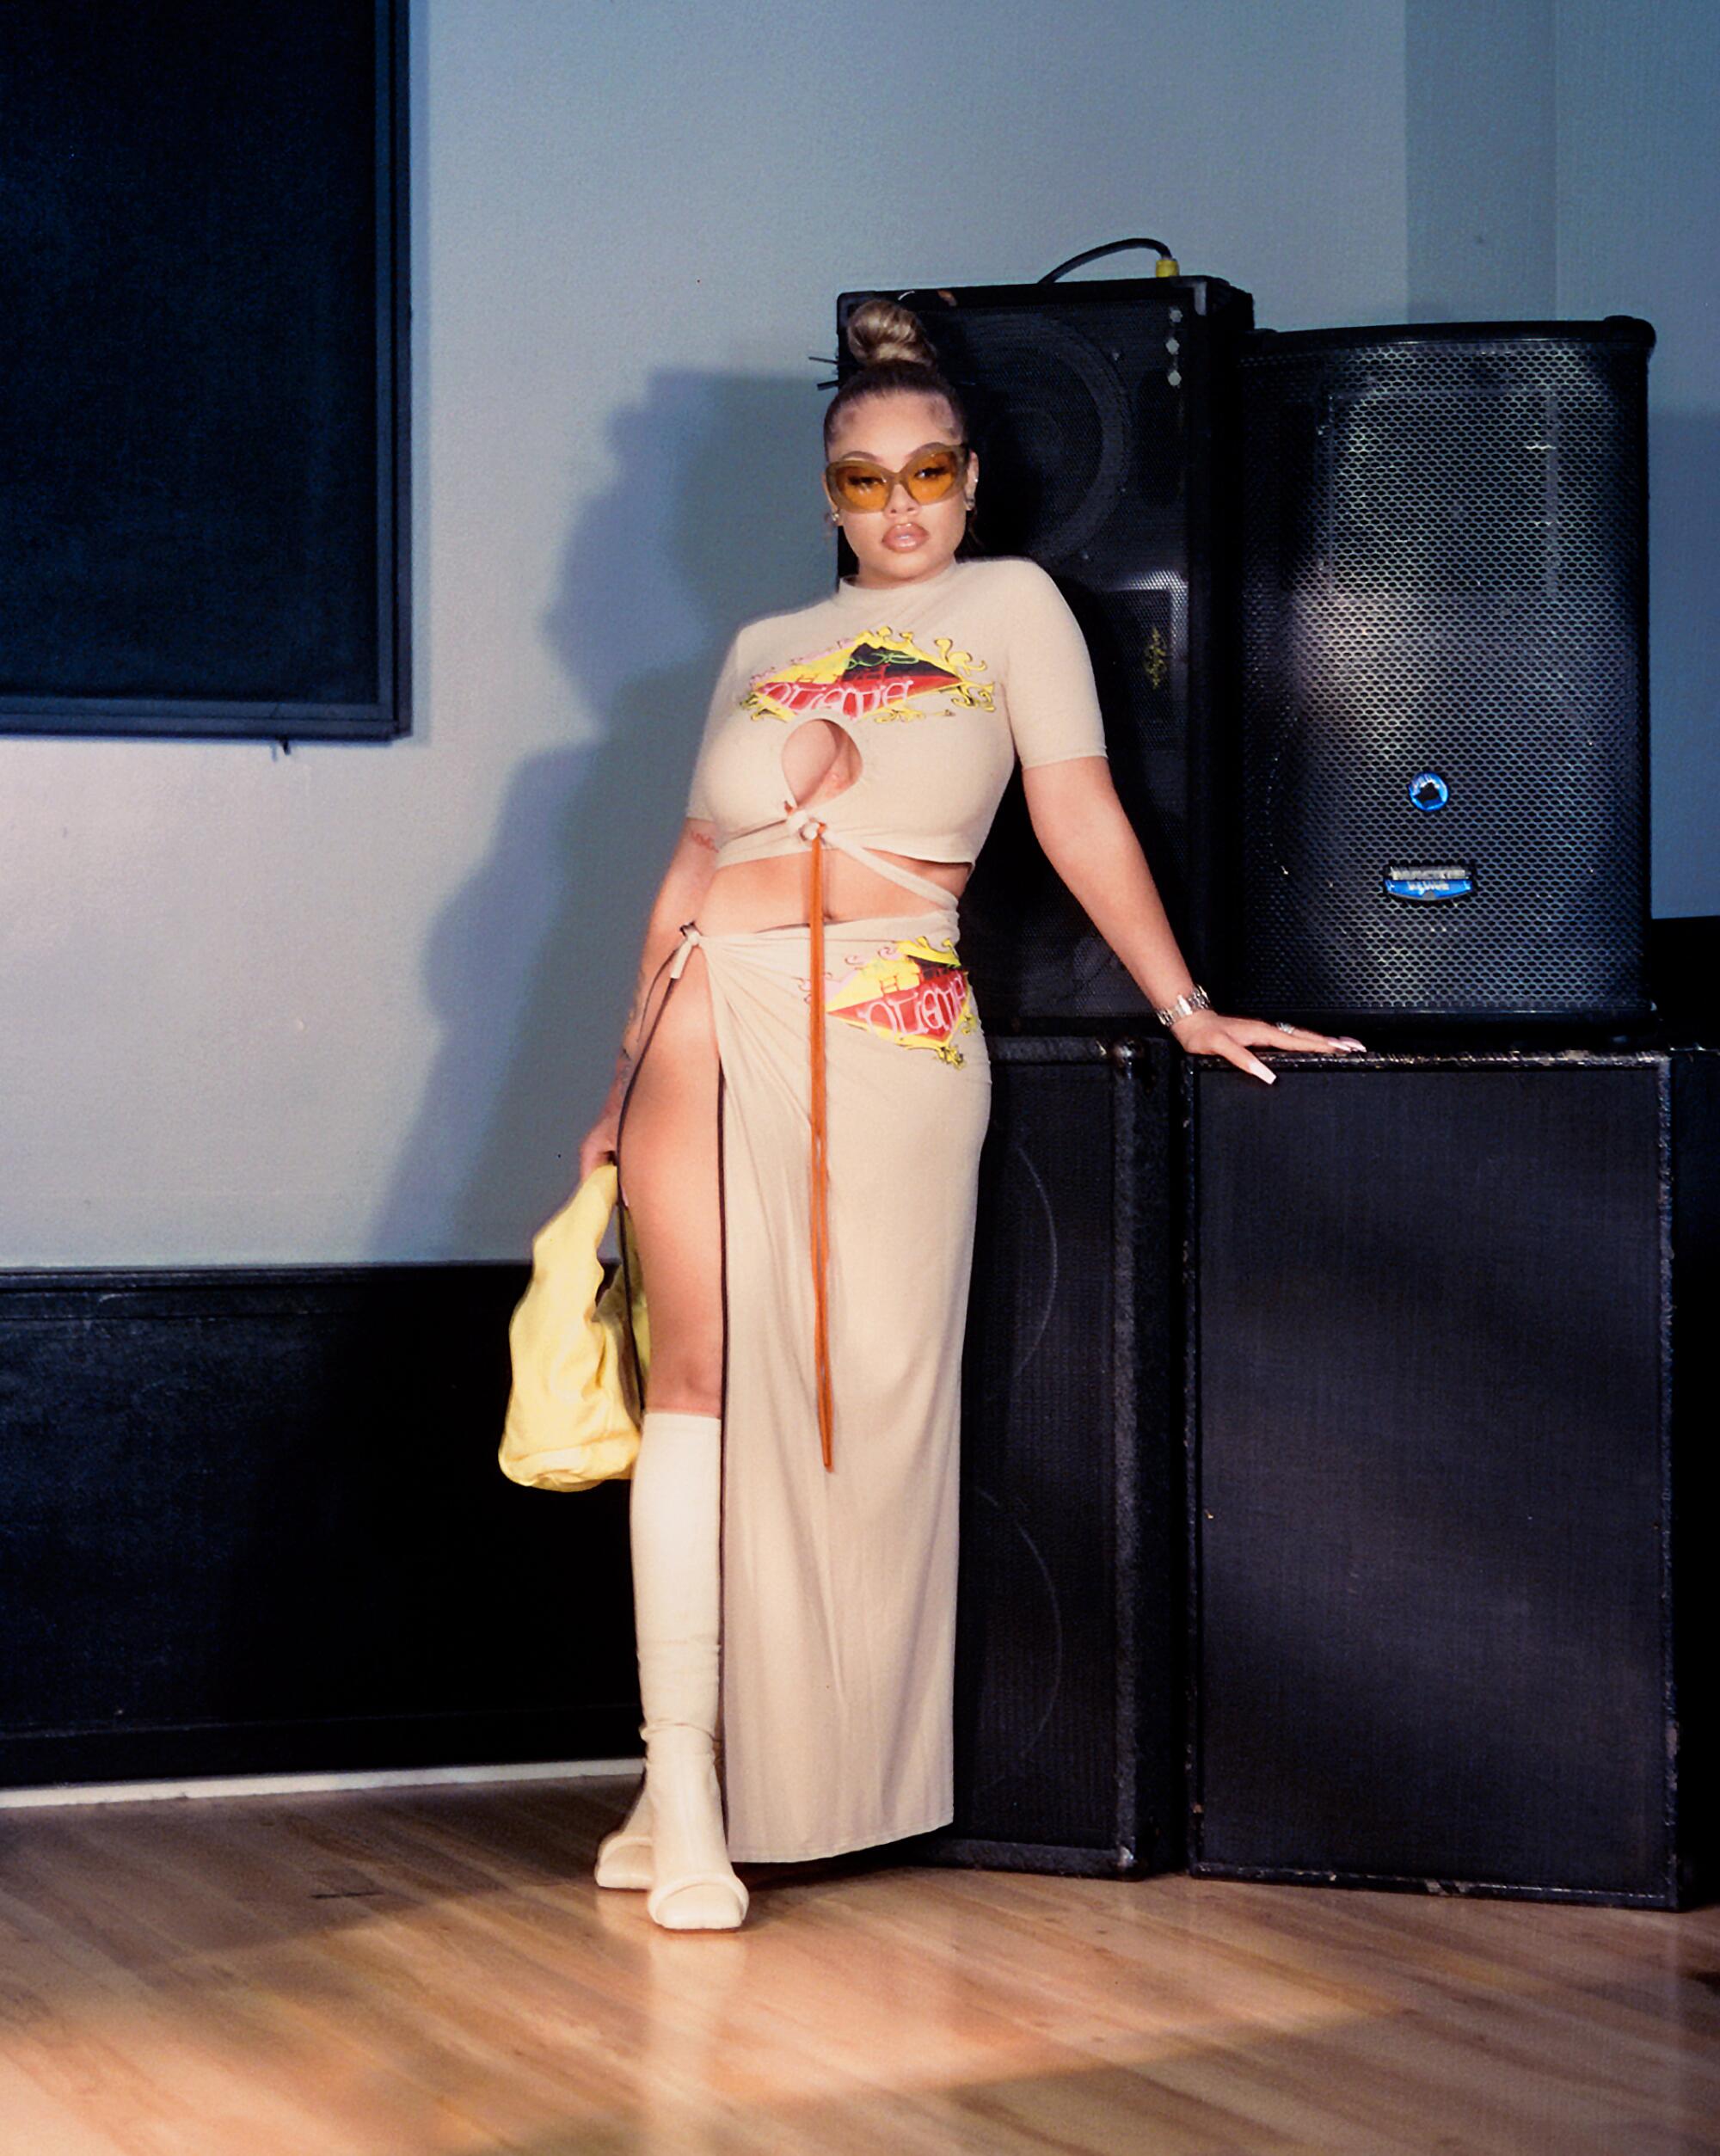 A female rapper in a tan dress poses in front of large speakers